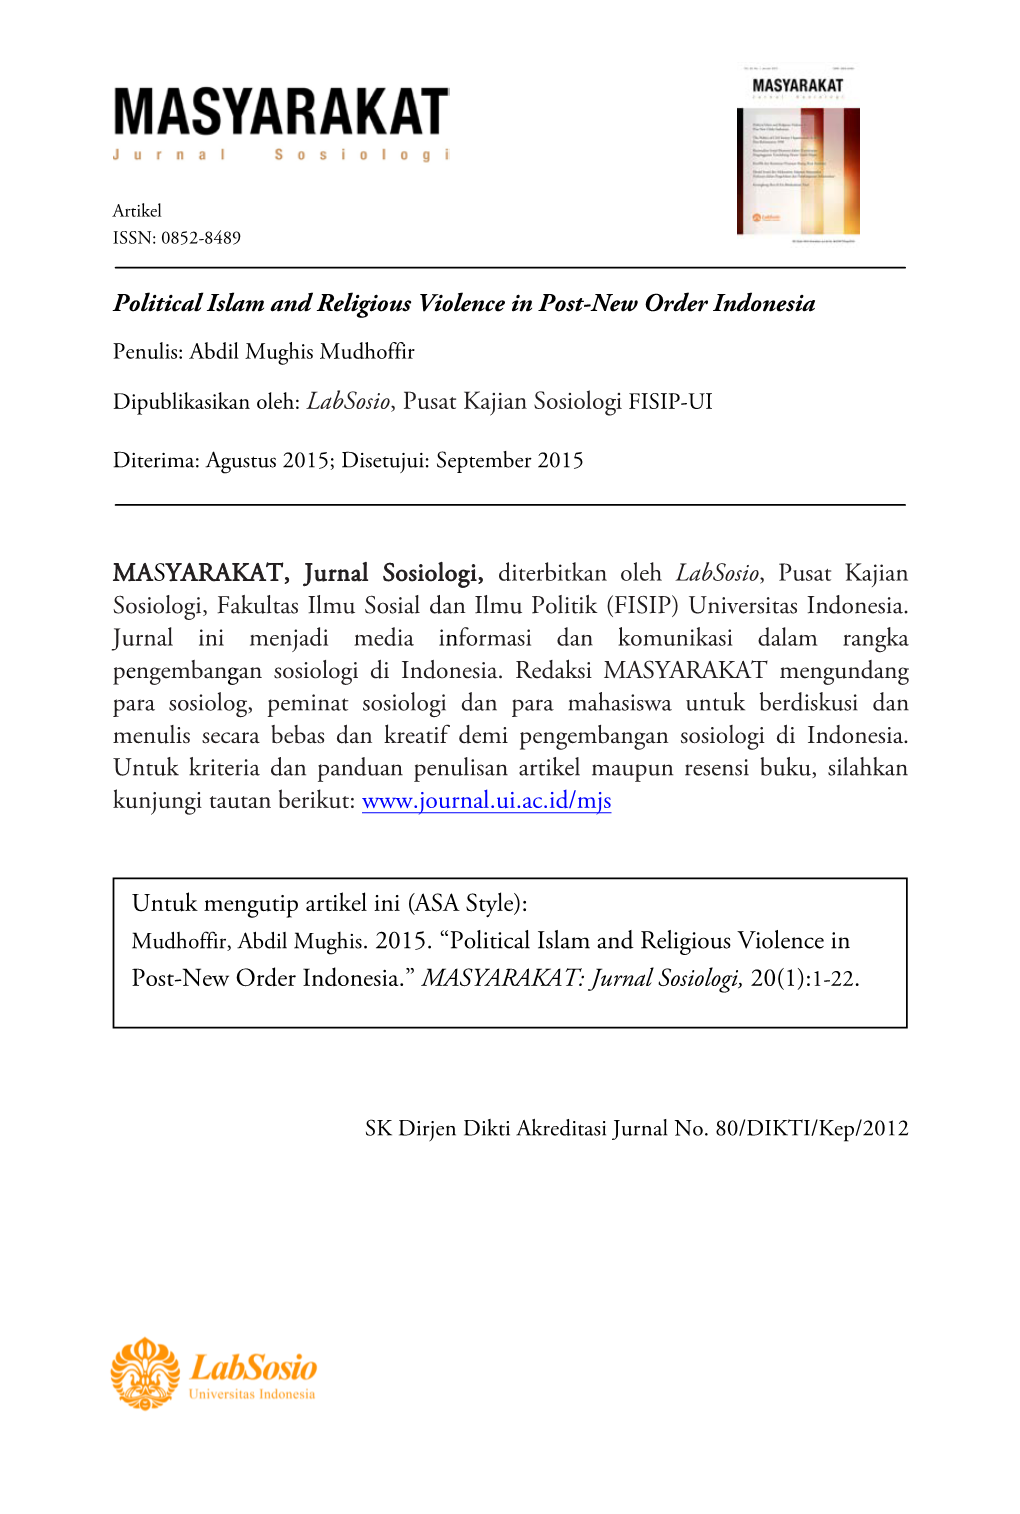 Political Islam and Religious Violence in Post-New Order Indonesia